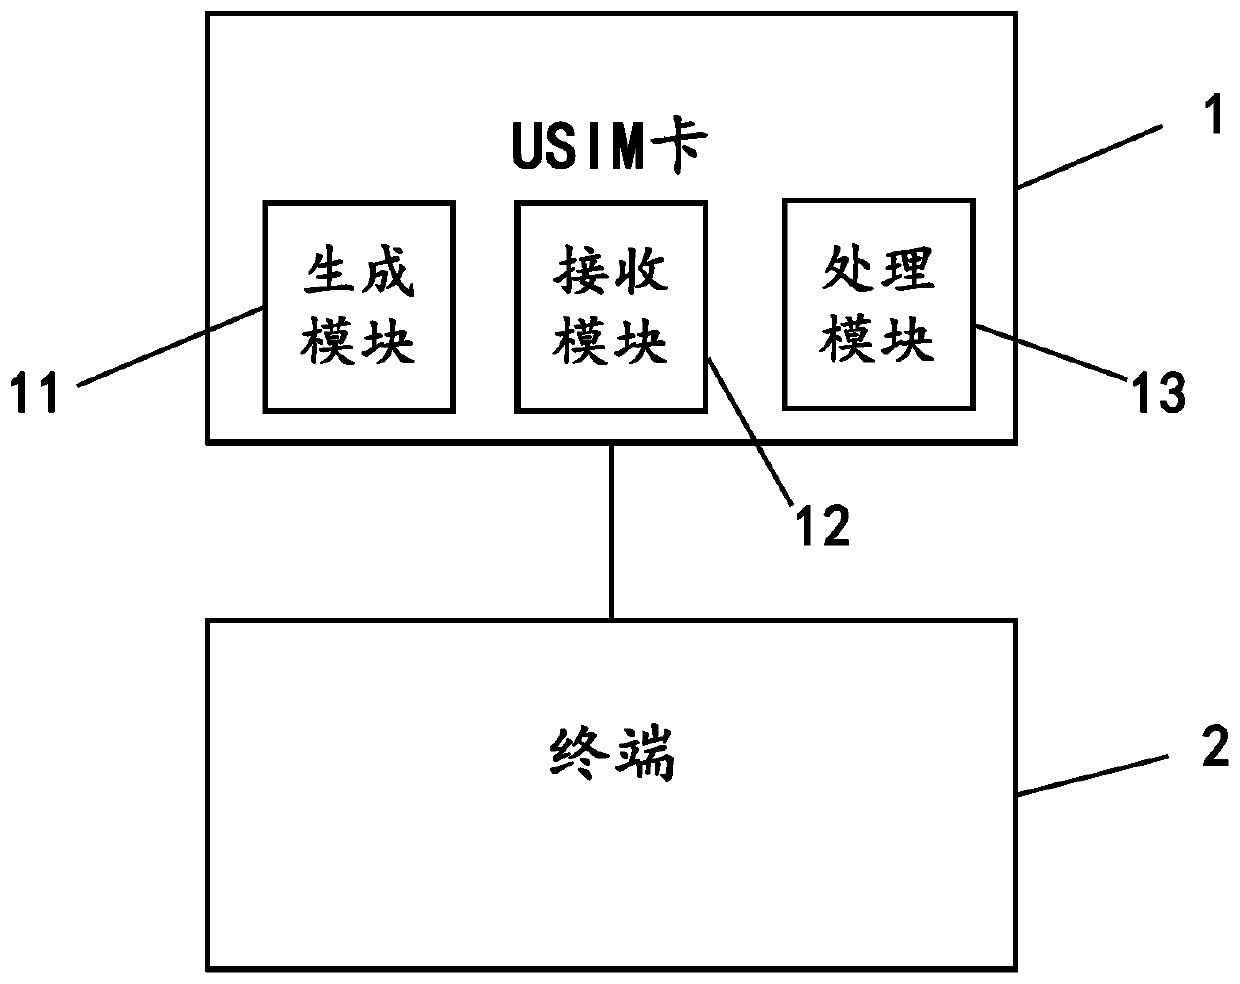 Method and system for defining connection change based on USIM card